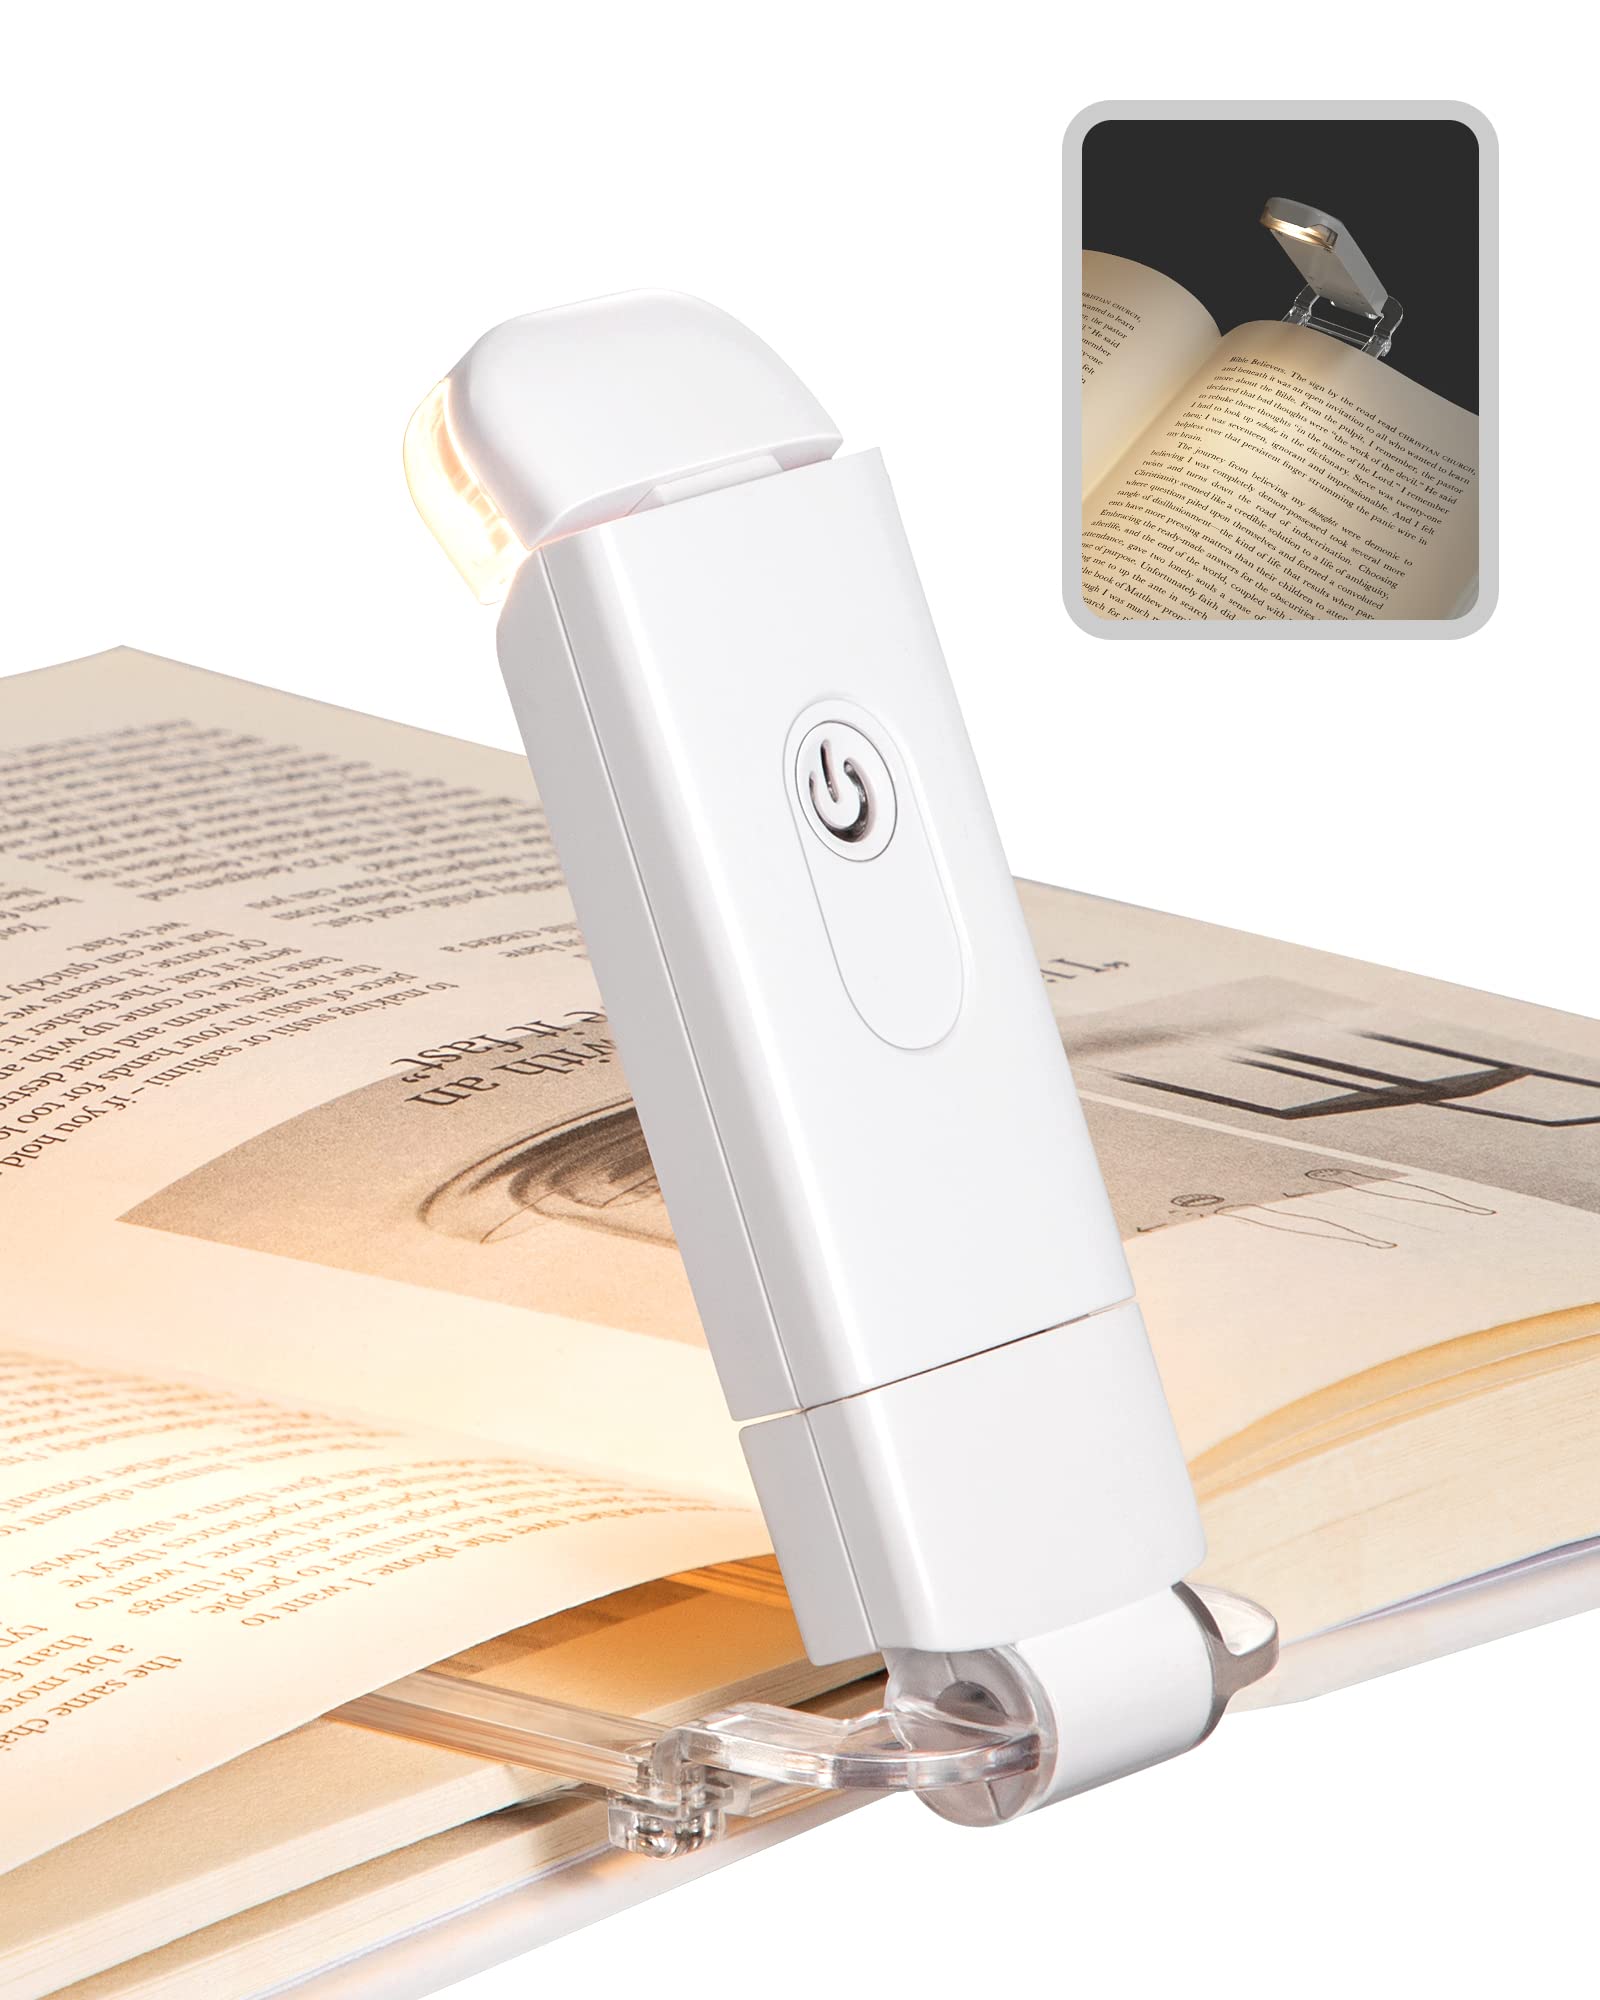 DEWENWILS USB Rechargeable Book Light, Warm White, Brightness Adjustable for Eye-Protection, LED clip on Portable Bookmark Light